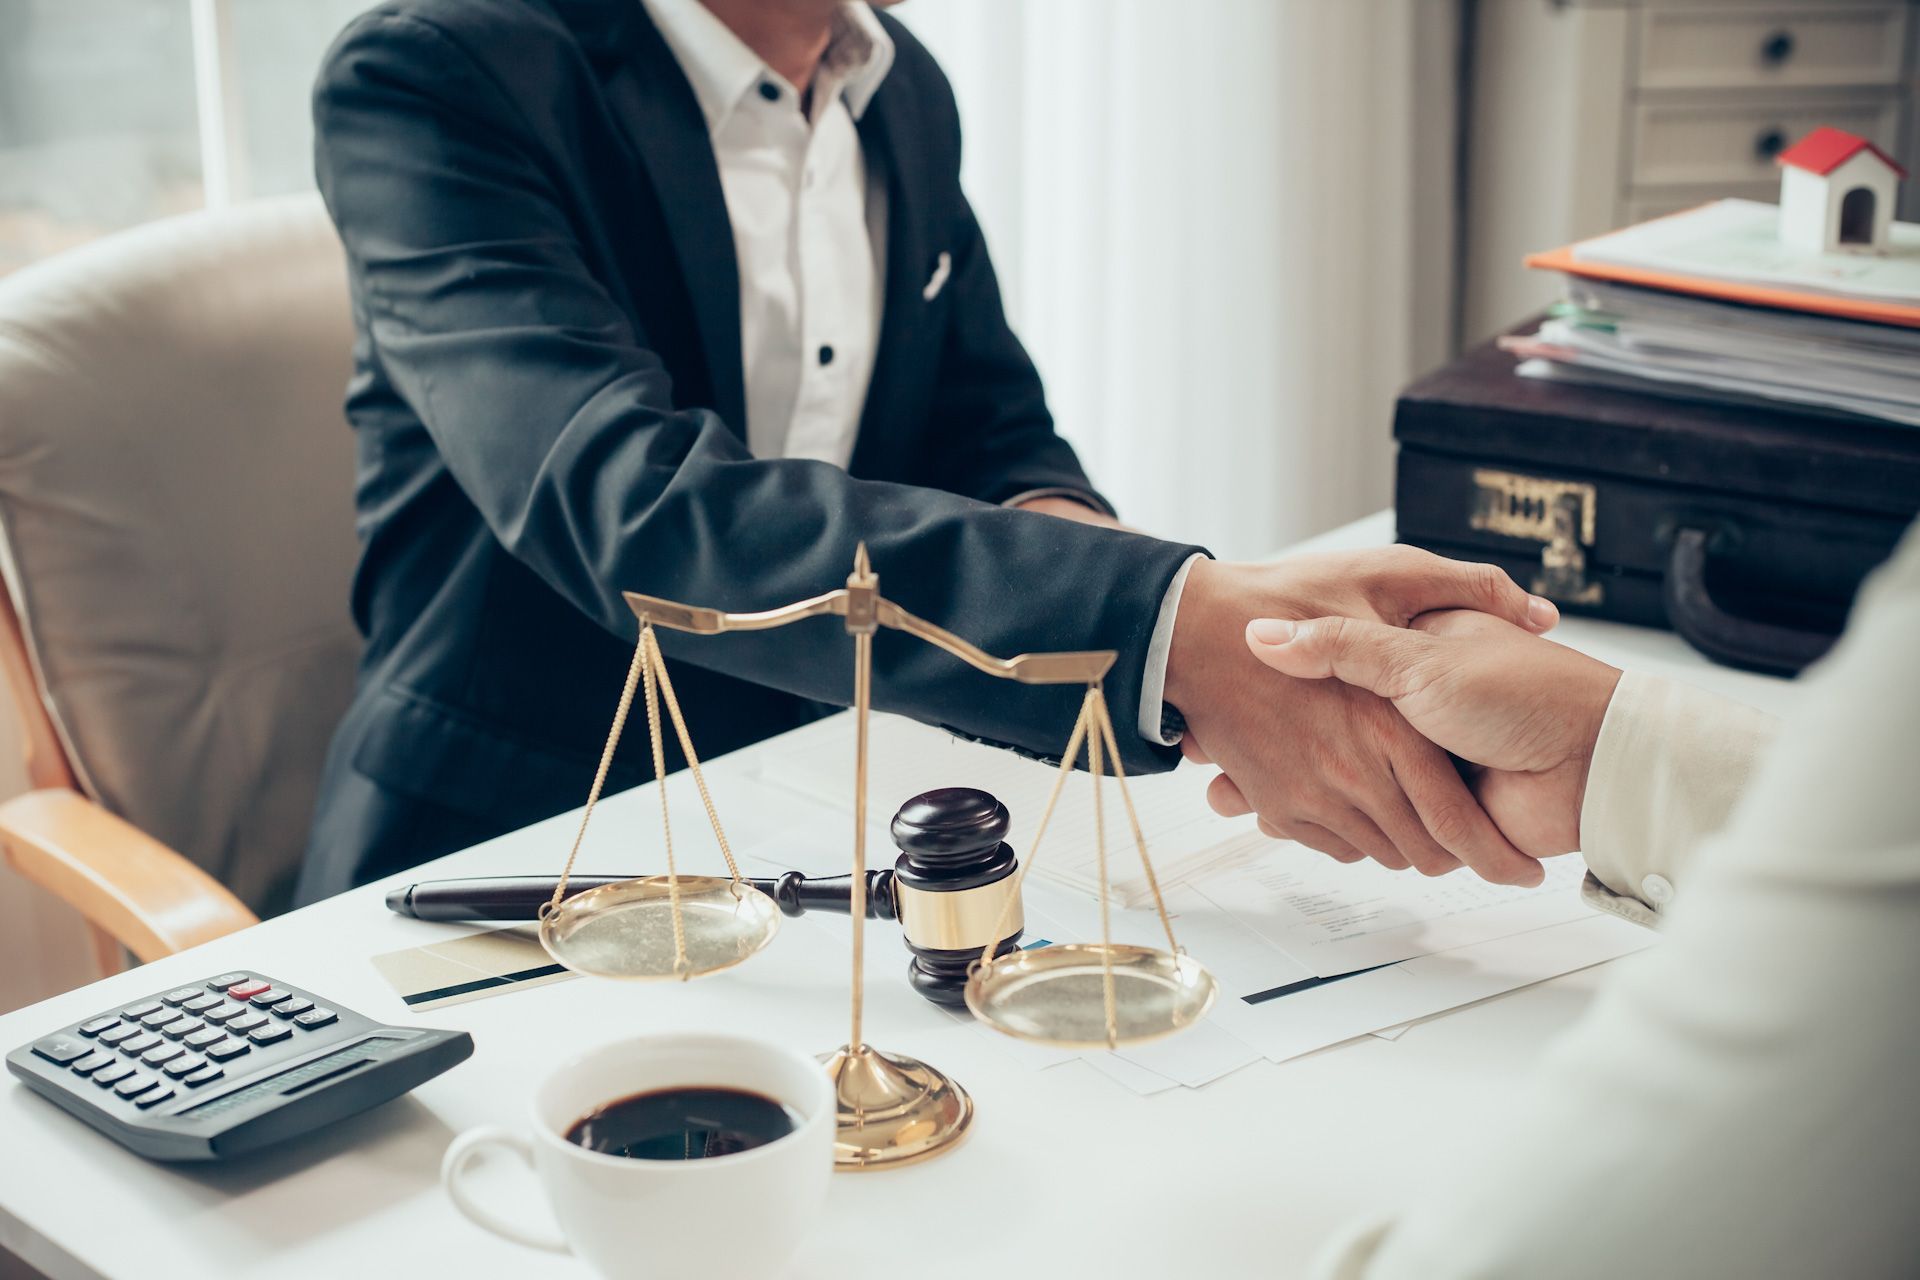 A man and woman are shaking hands over a table with scales of justice